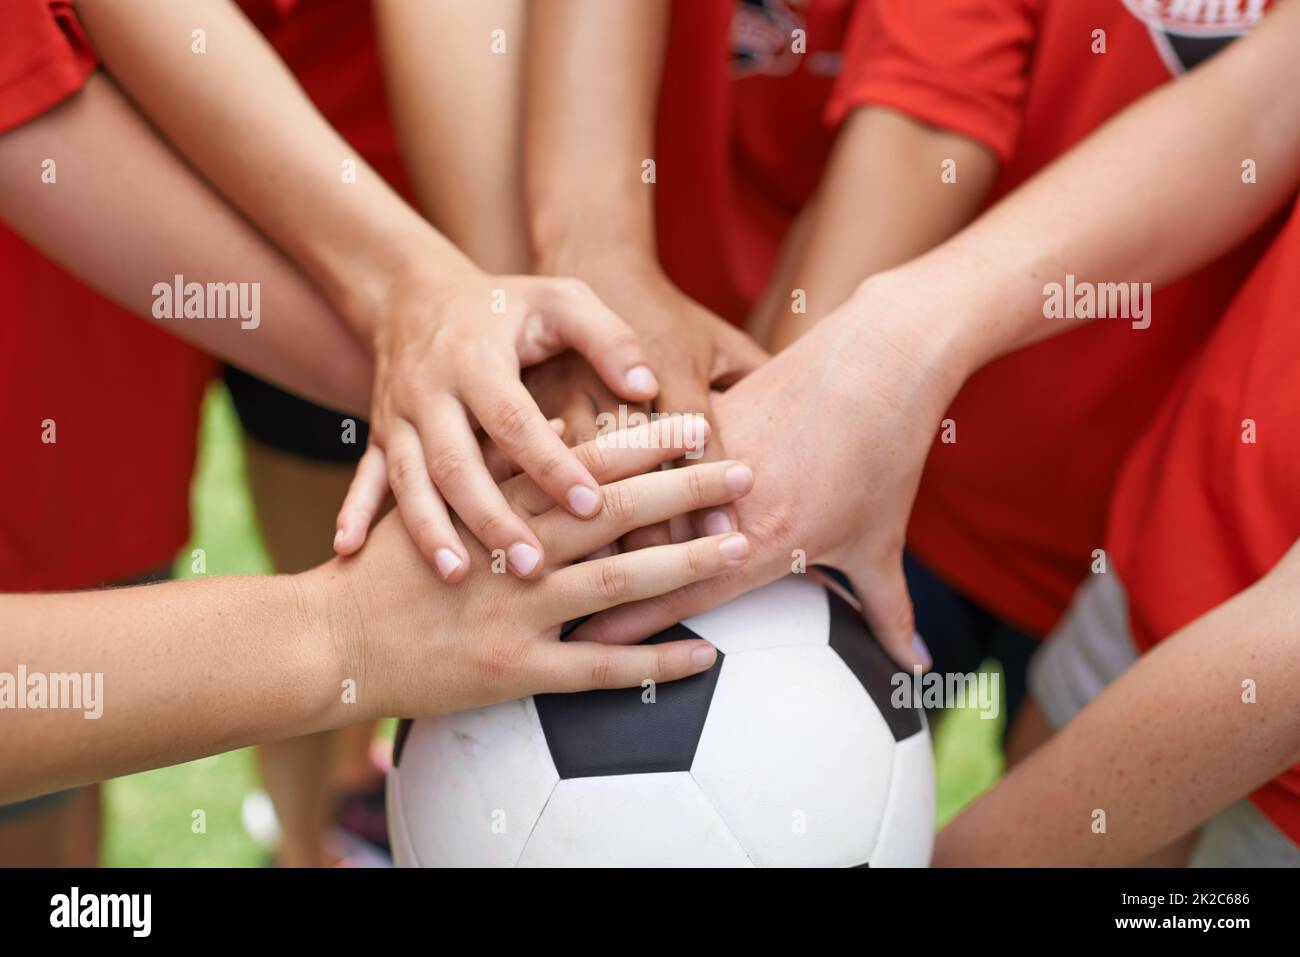 Team spirit. Cropped image of a group of girls with their hands piled on top of a soccer ball. Stock Photo